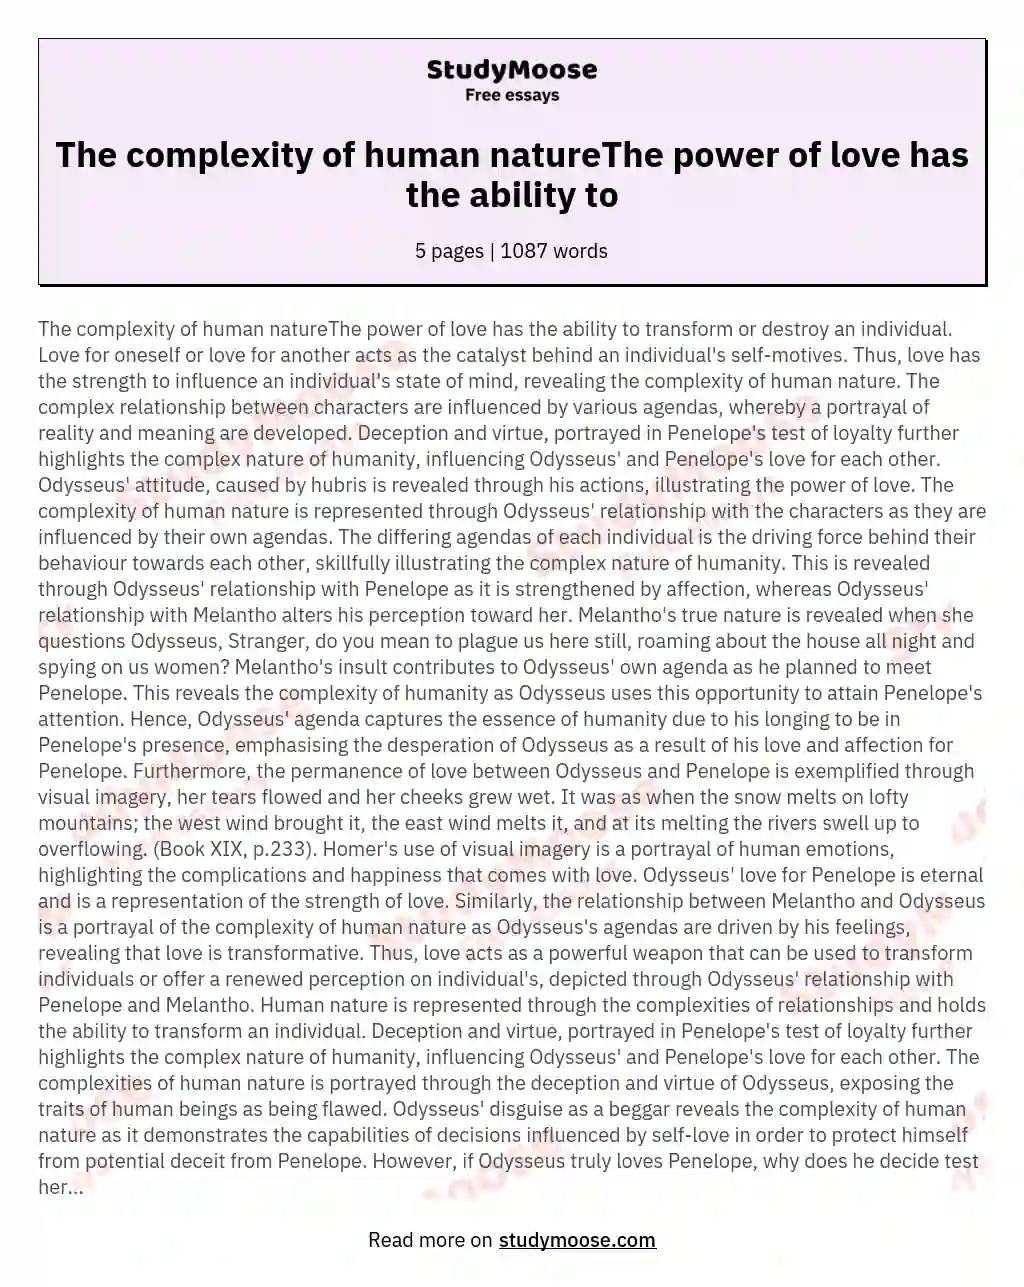 The complexity of human natureThe power of love has the ability to essay